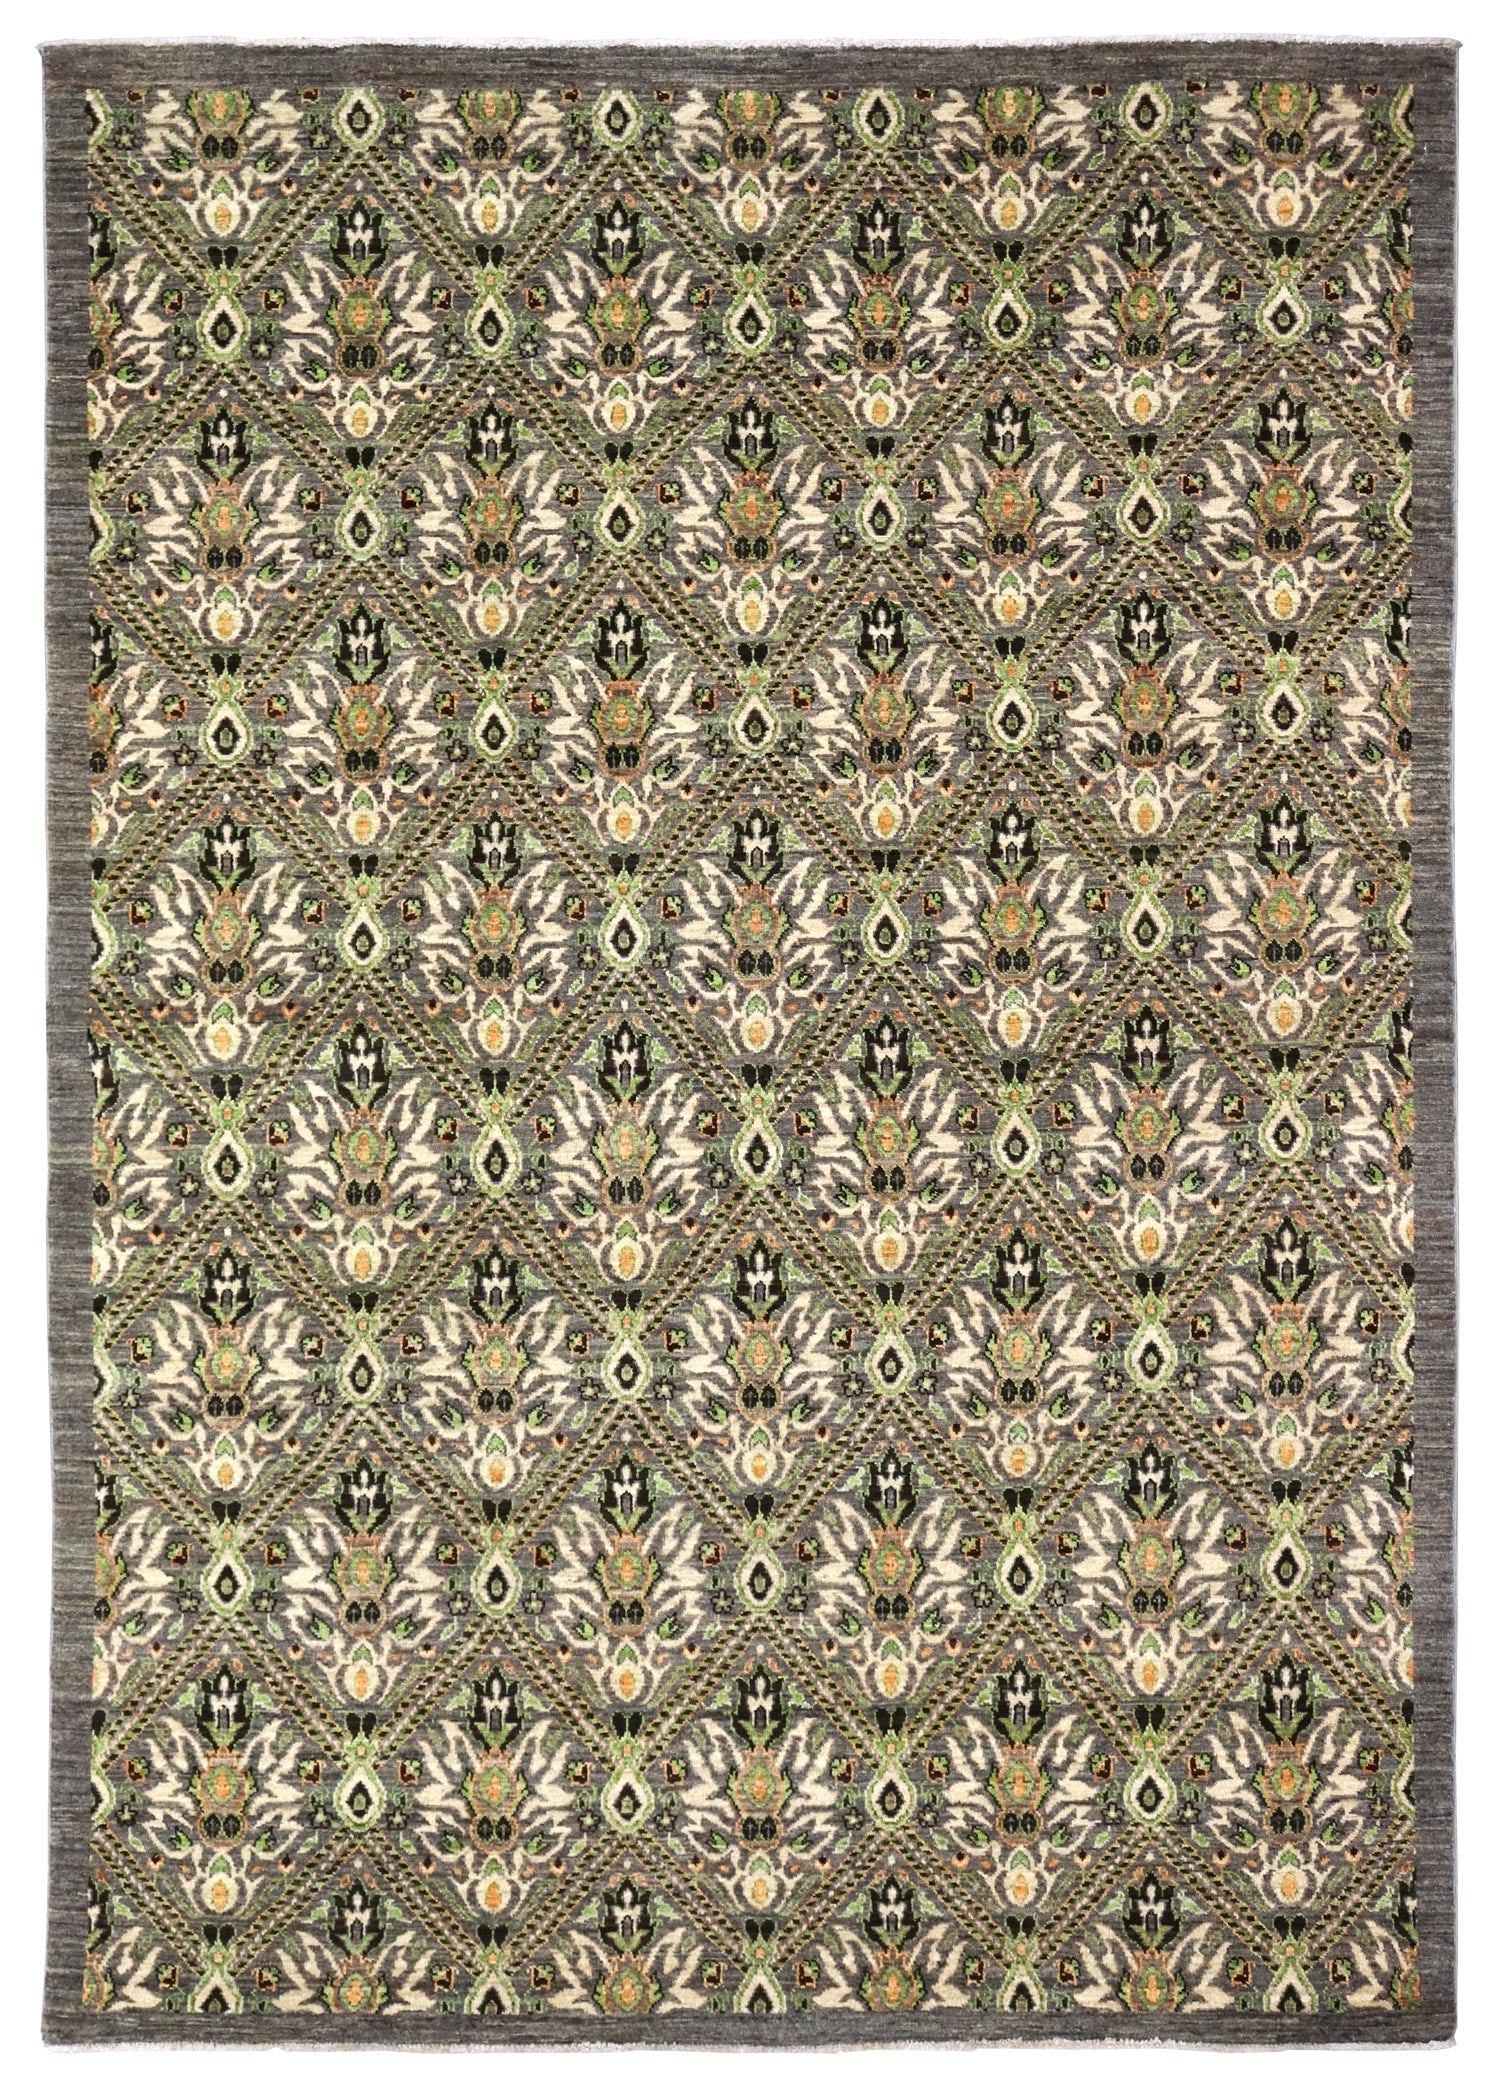 Middle Ages Handwoven Transitional Rug